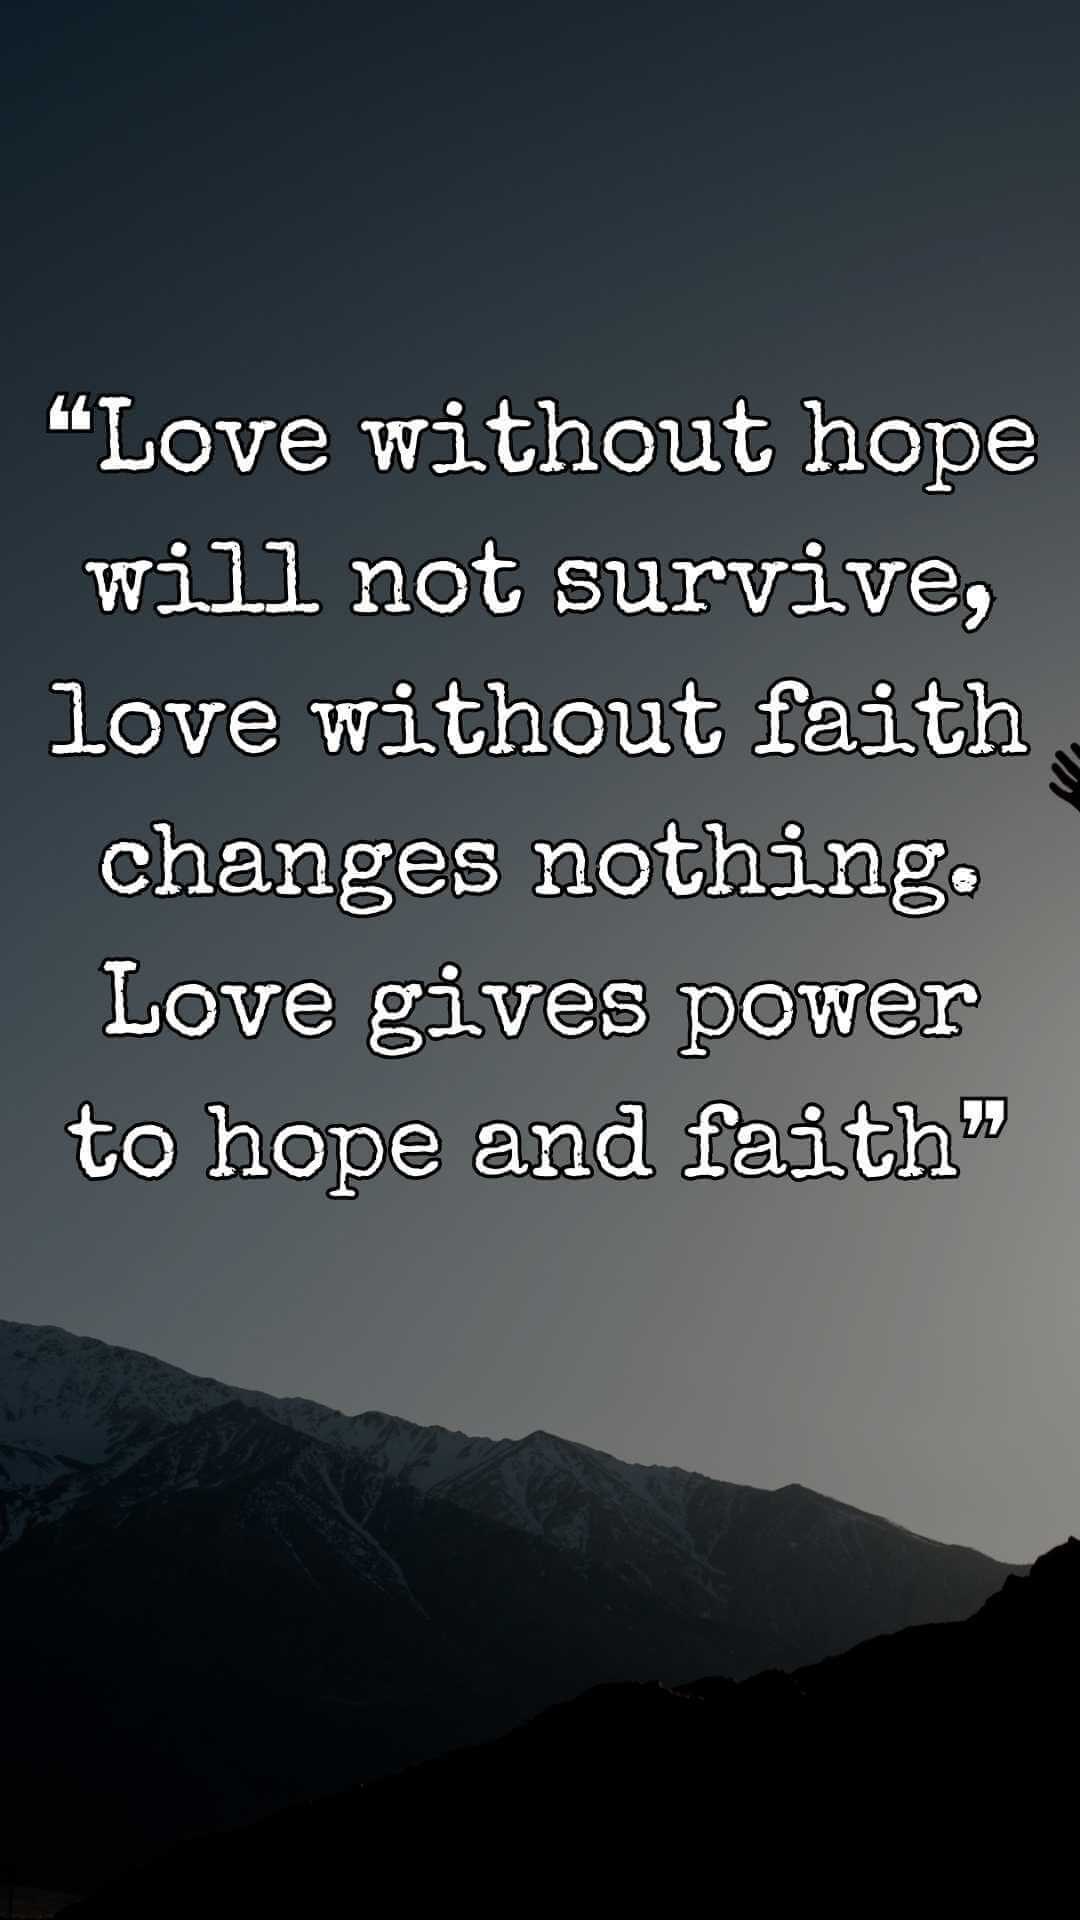 ❝Love without hope will not survive, love without faith changes nothing. Love gives power to hope and faith❞